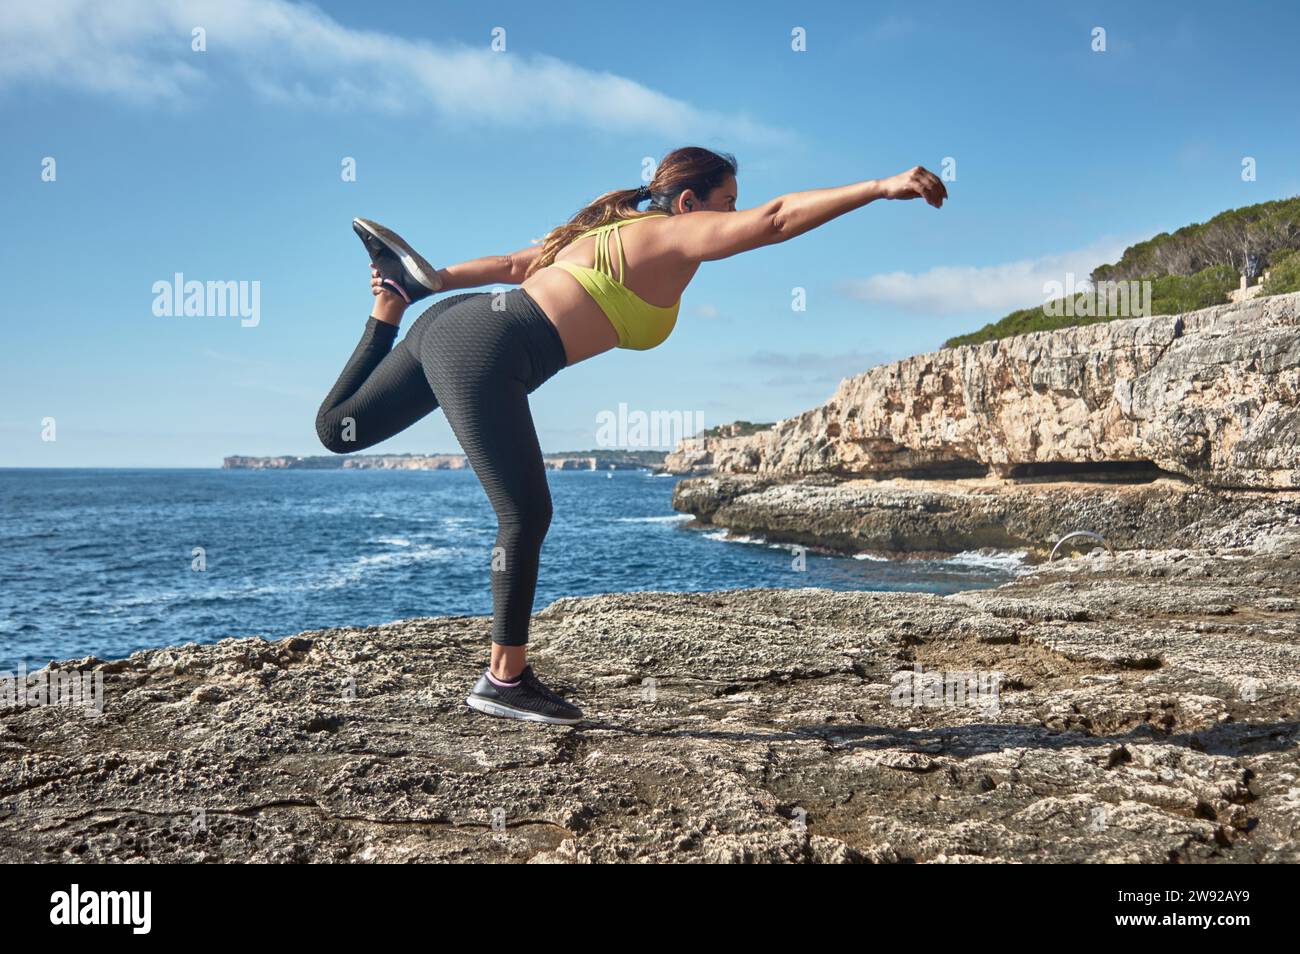 A woman performing a yoga pose on a rocky shore by the sea under a clear sky Stock Photo